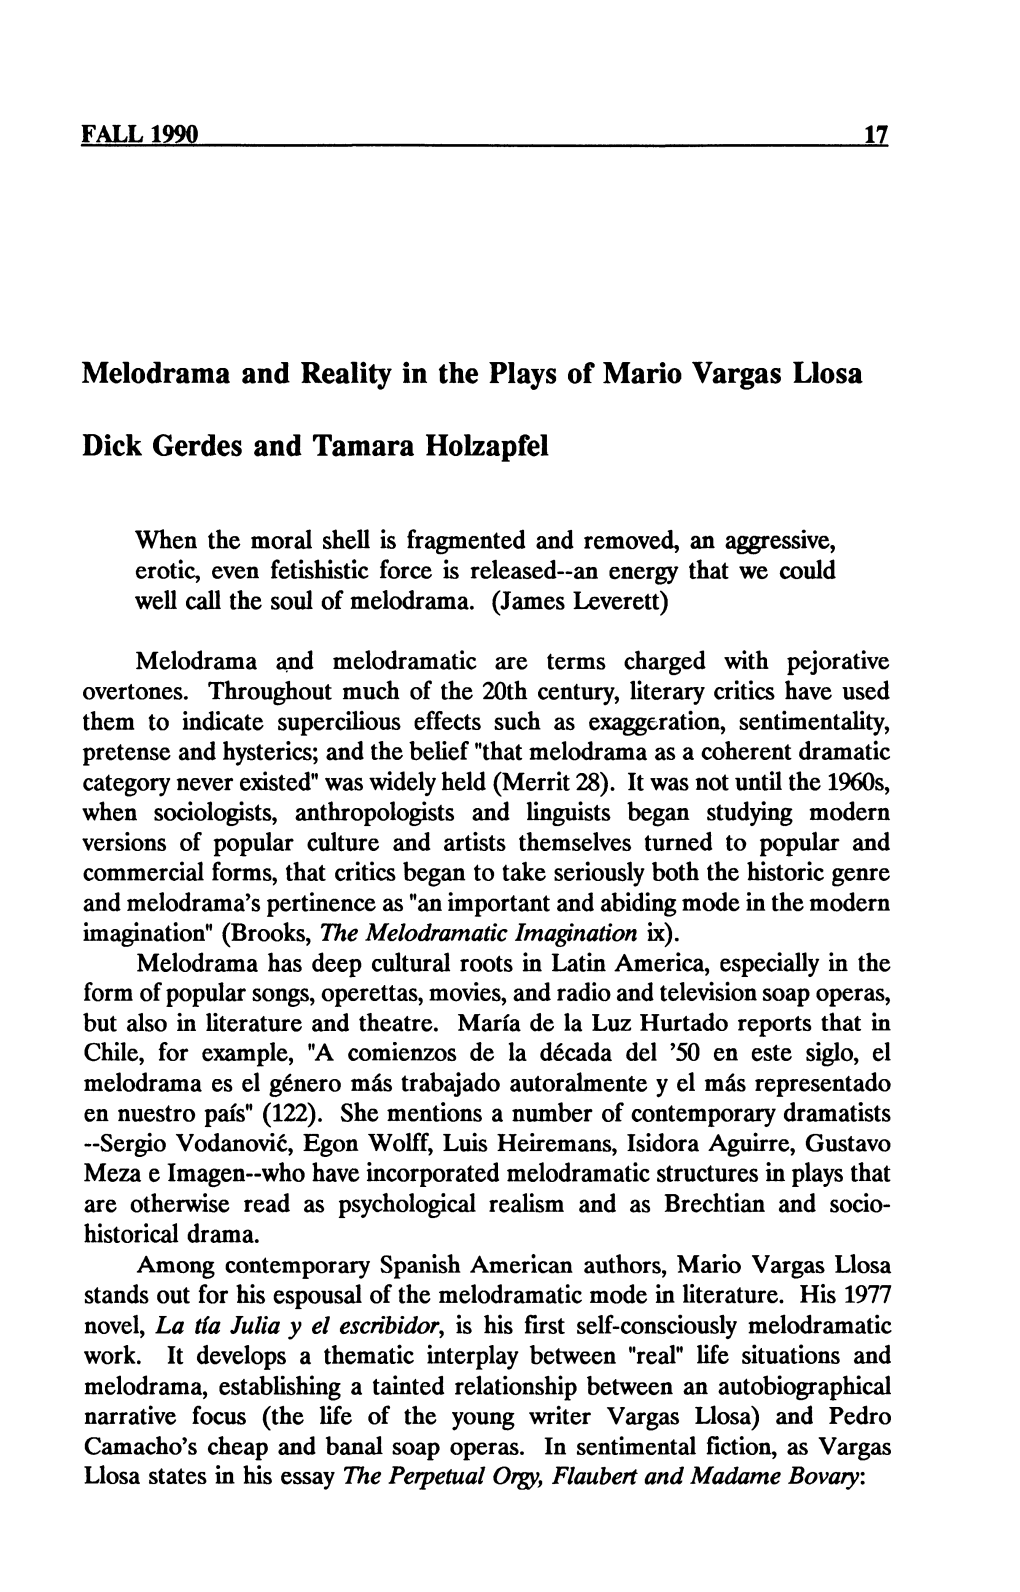 Melodrama and Reality in the Plays of Mario Vargas Llosa Dick Gerdes